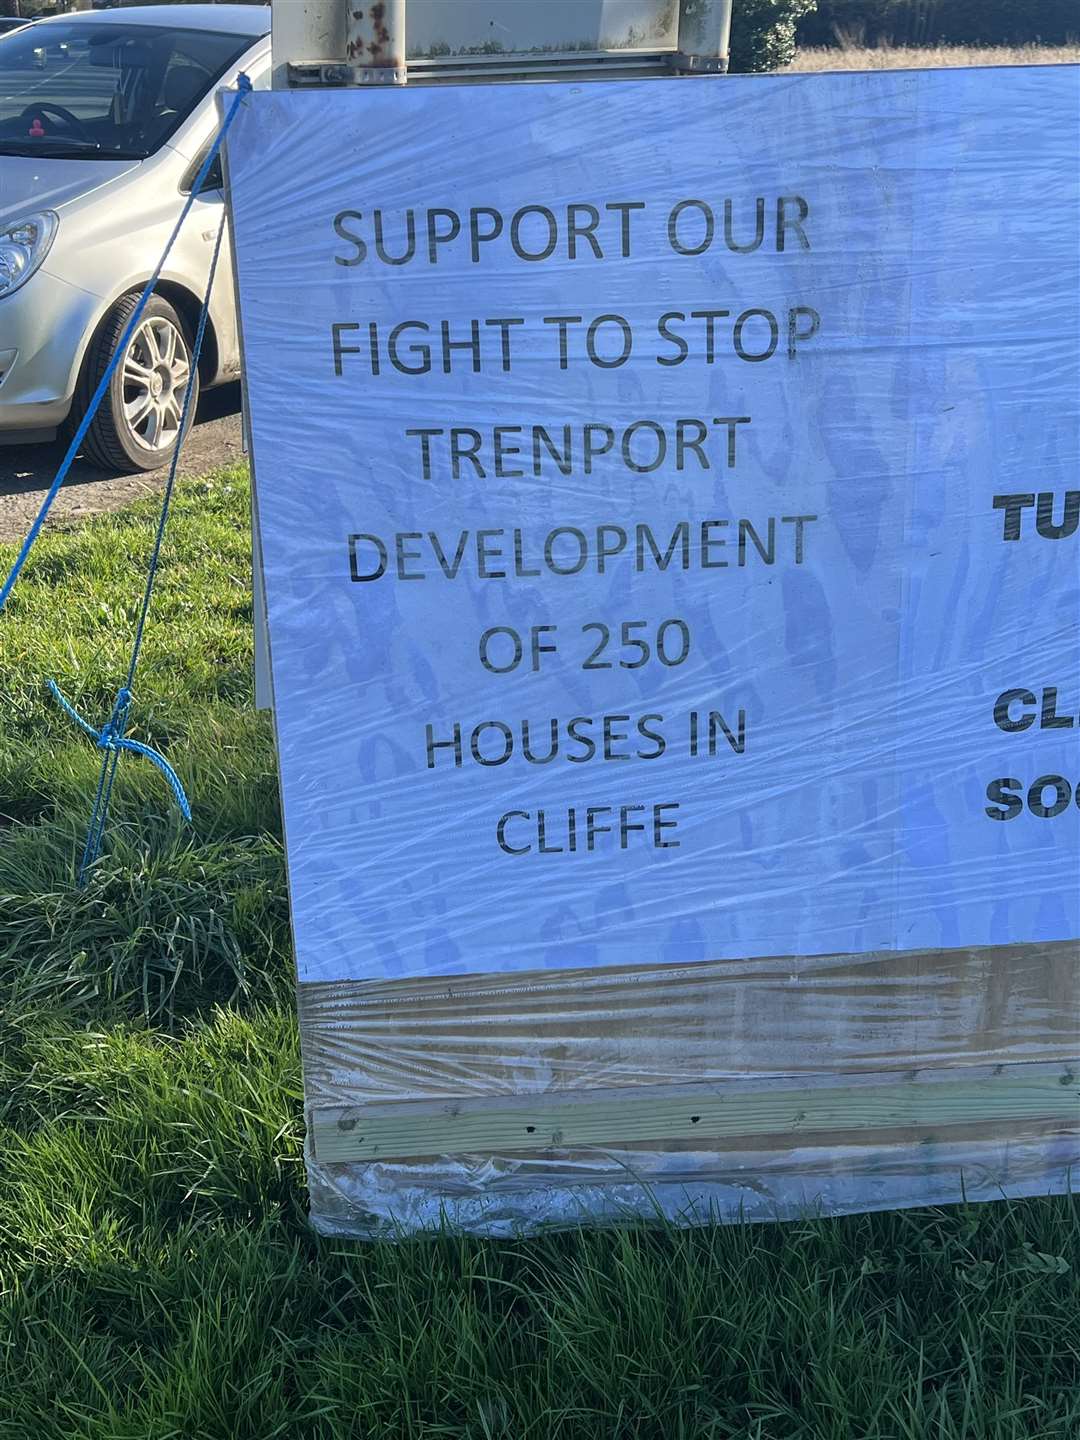 A sign in Cliffe opposing plans for 250 homes either side of Church Street